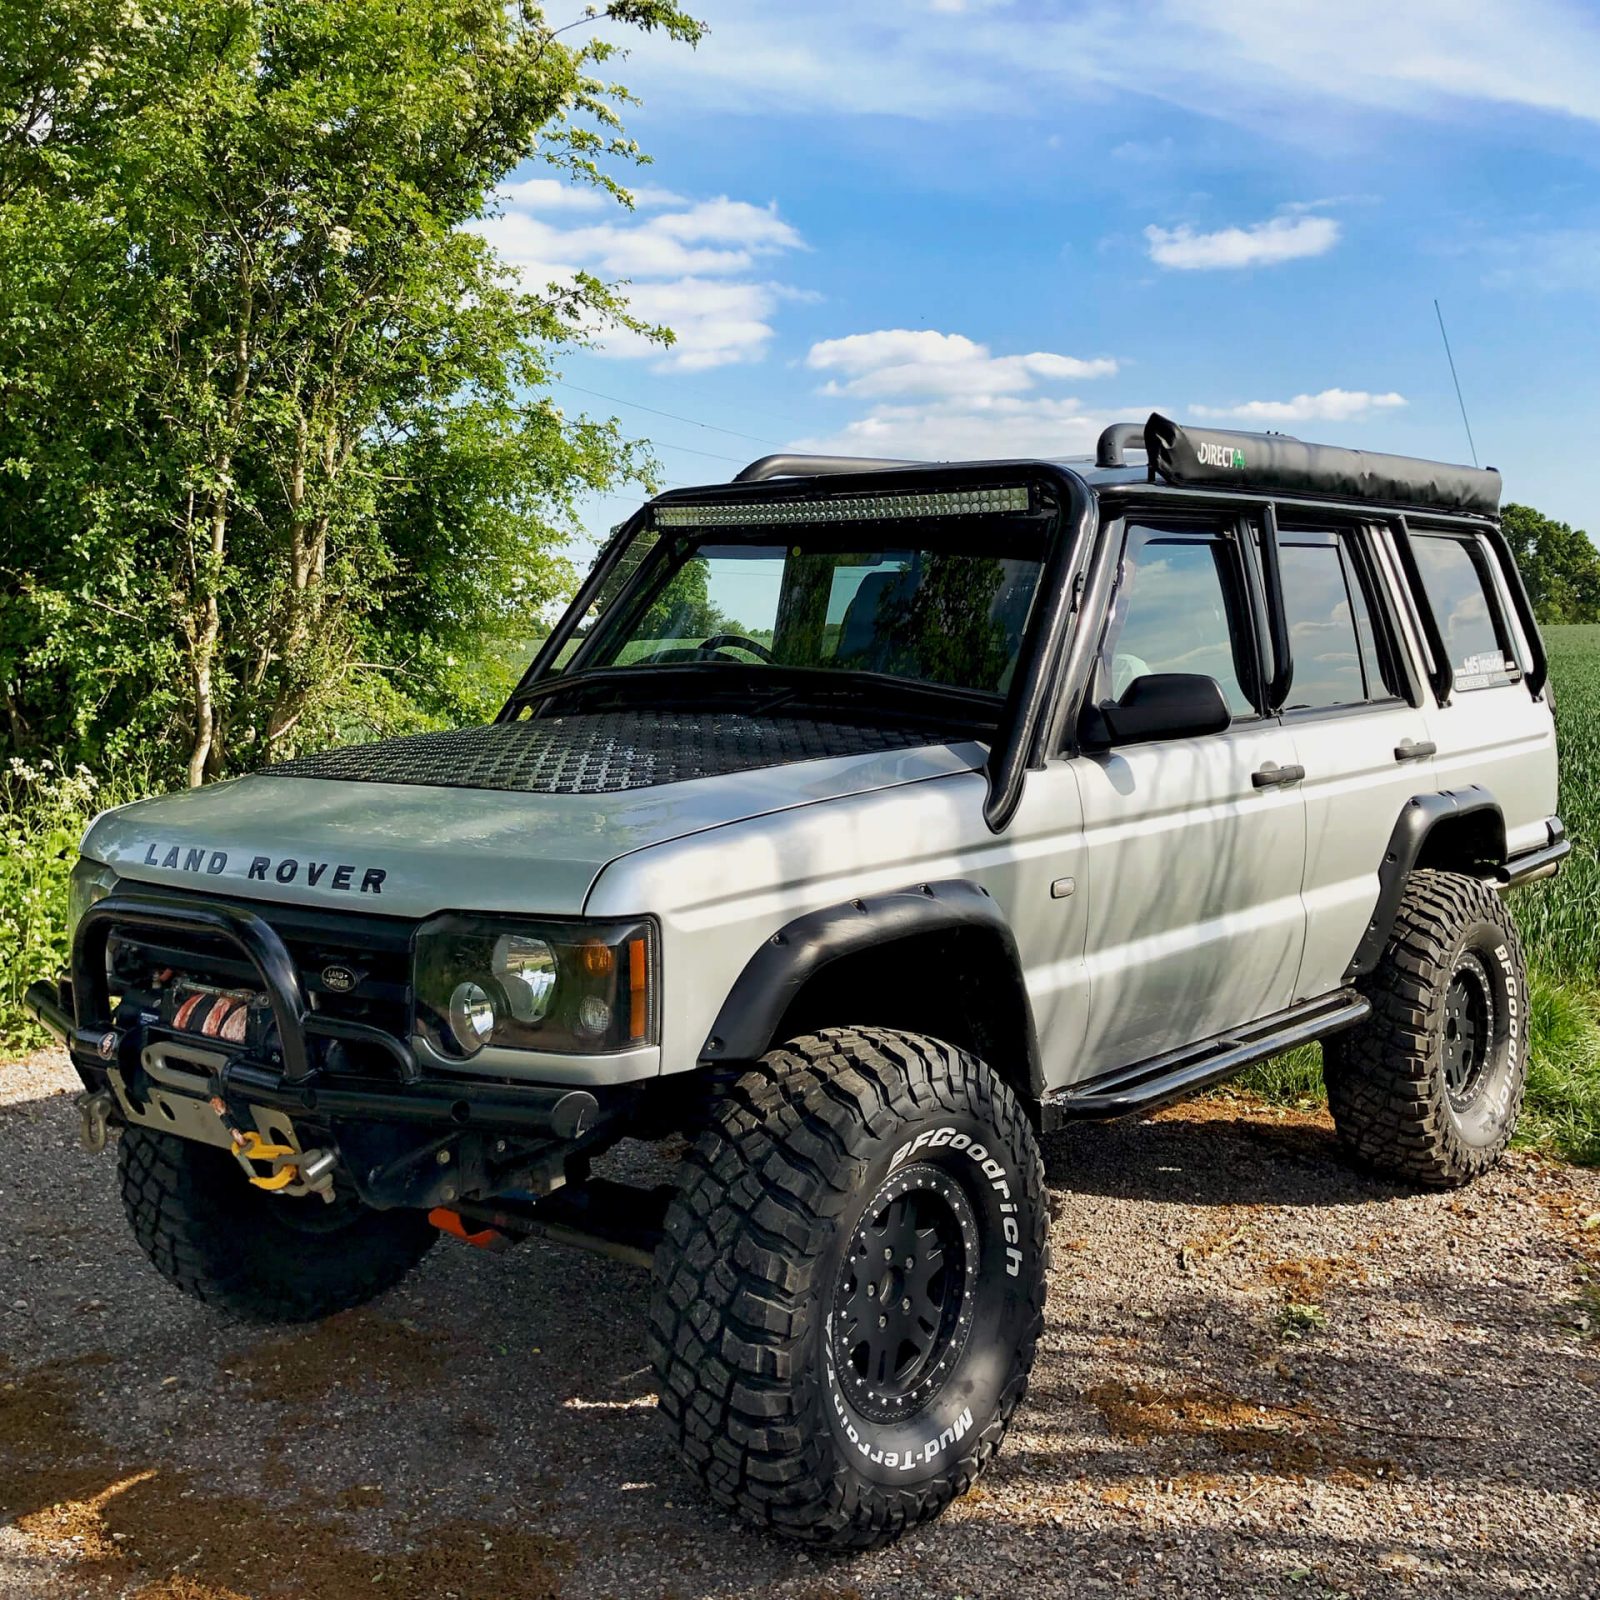 Lifted Land Rover Discovery 2 TD5 on 35s Overland Rig